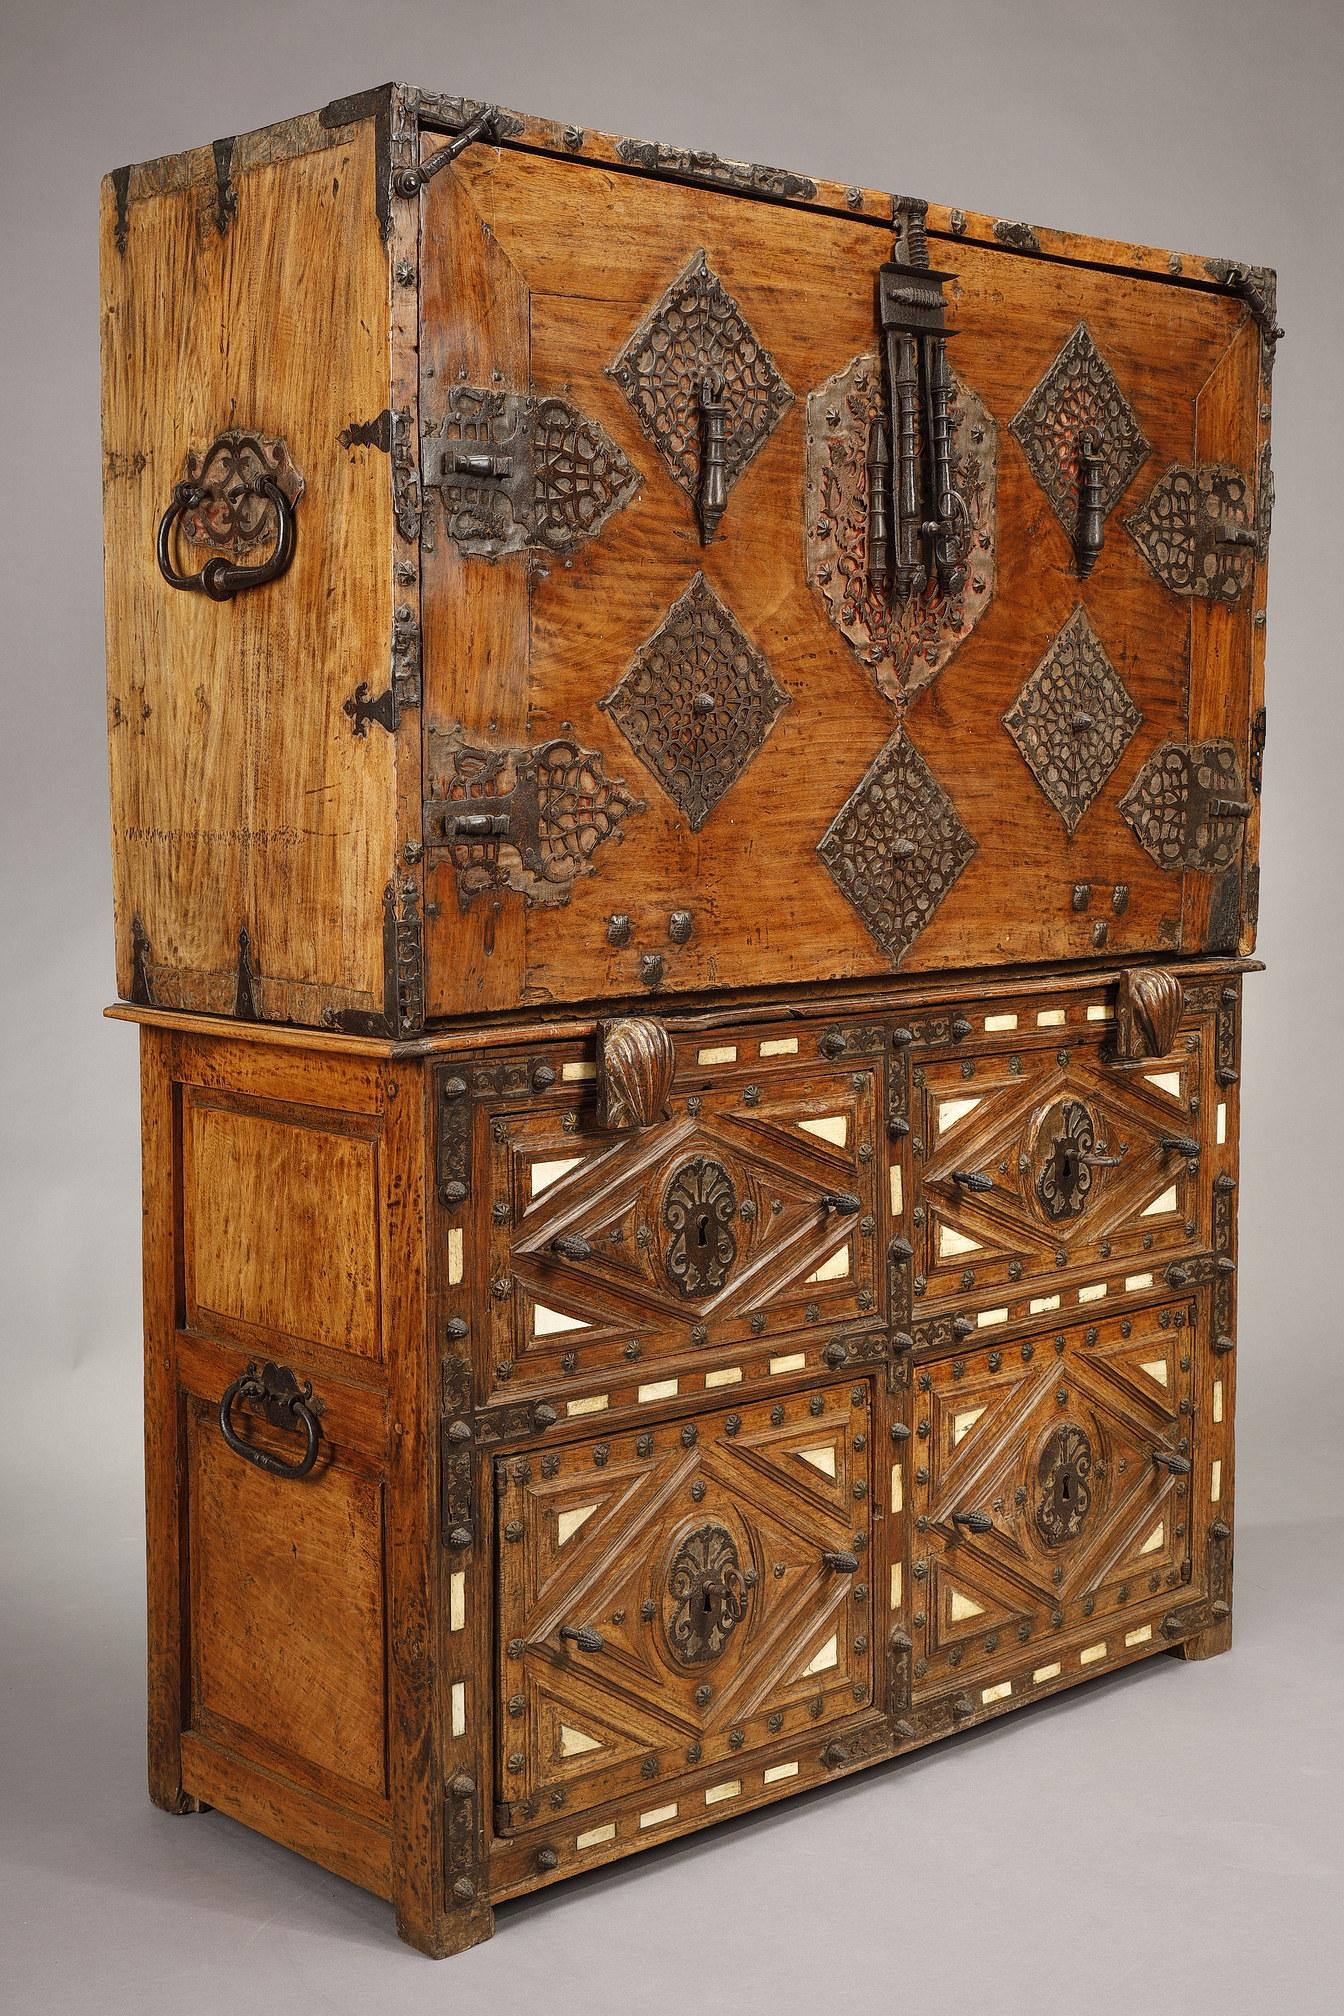 Baroque 17th Century Spanish Bargueno and Taquillon in Walnut and Bone Marquetry